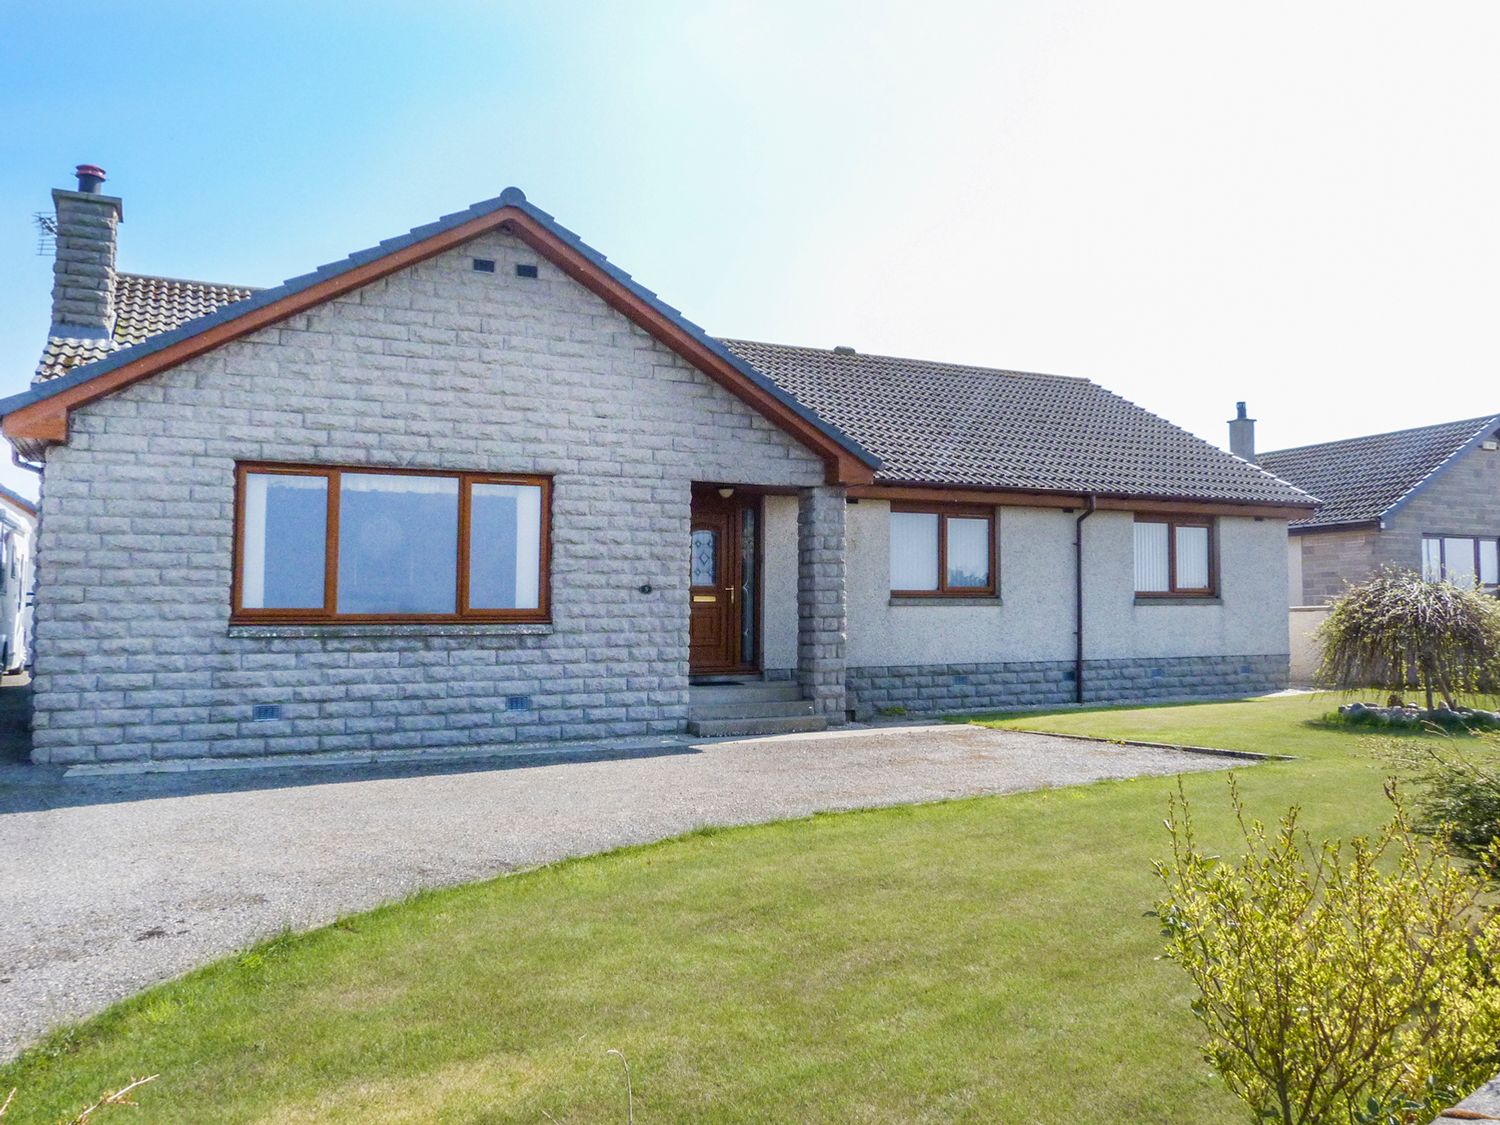 5 Golfview Drive - Scottish Lowlands - 951169 - photo 1